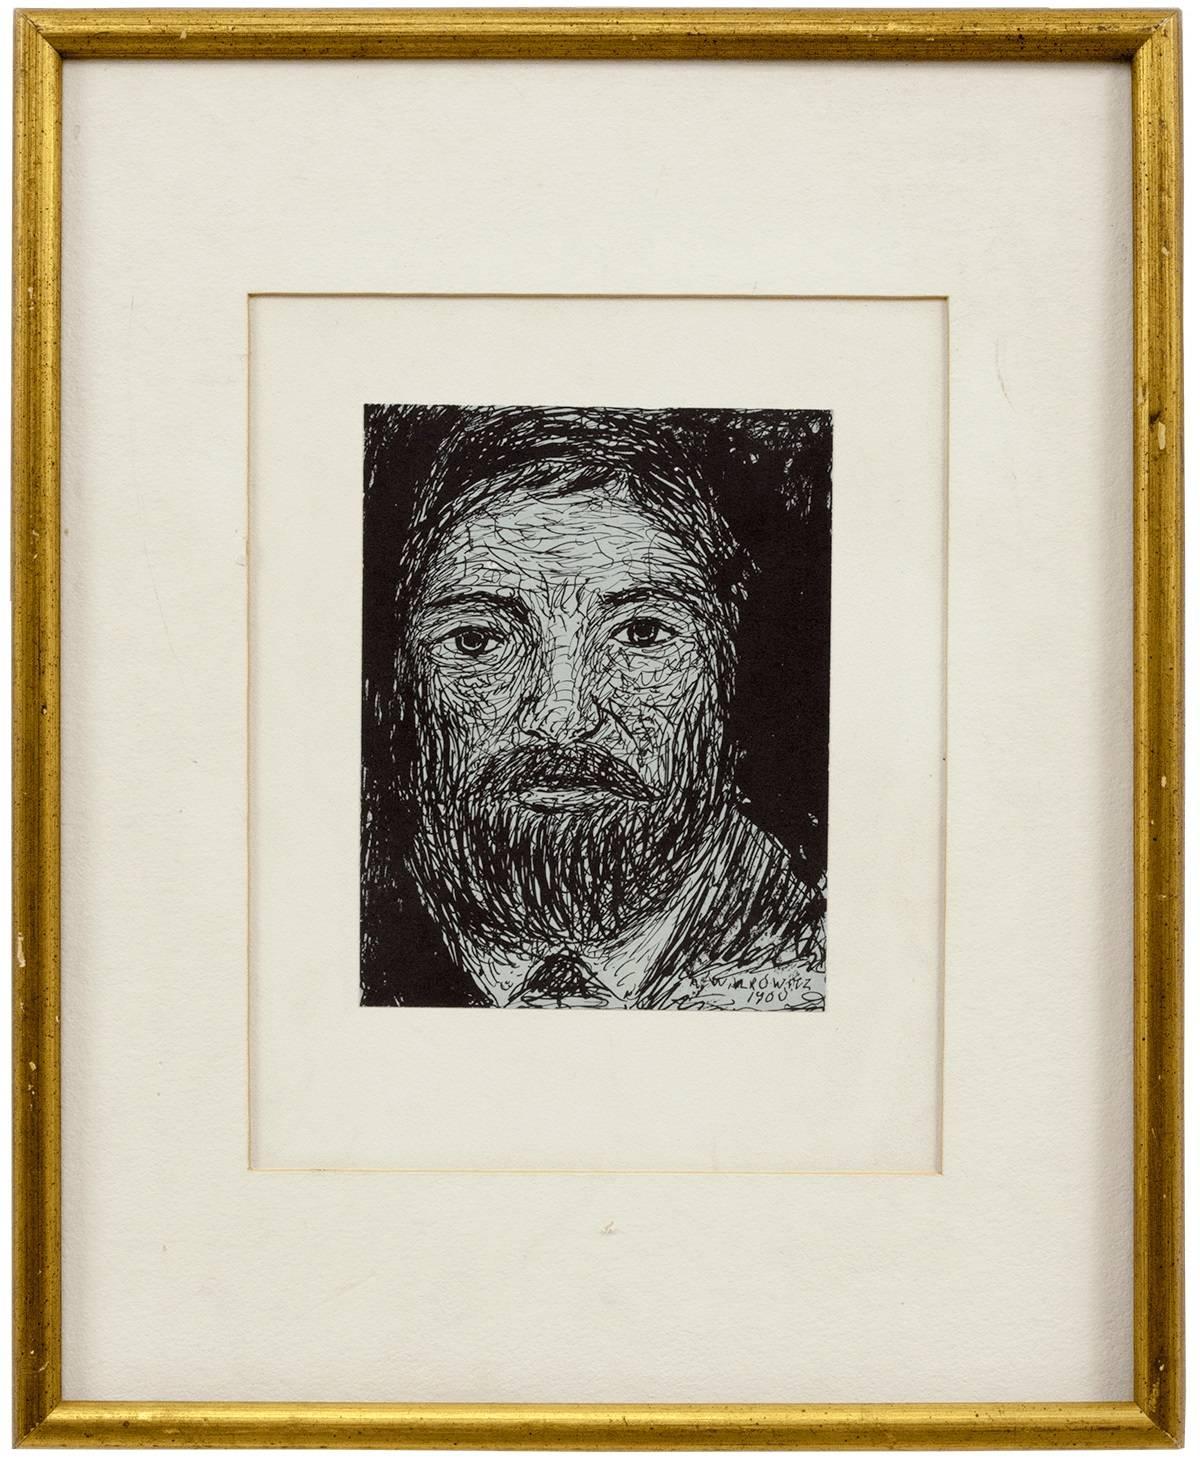 Modernist Drawing, Portrait of a Man - Art by Abraham Walkowitz